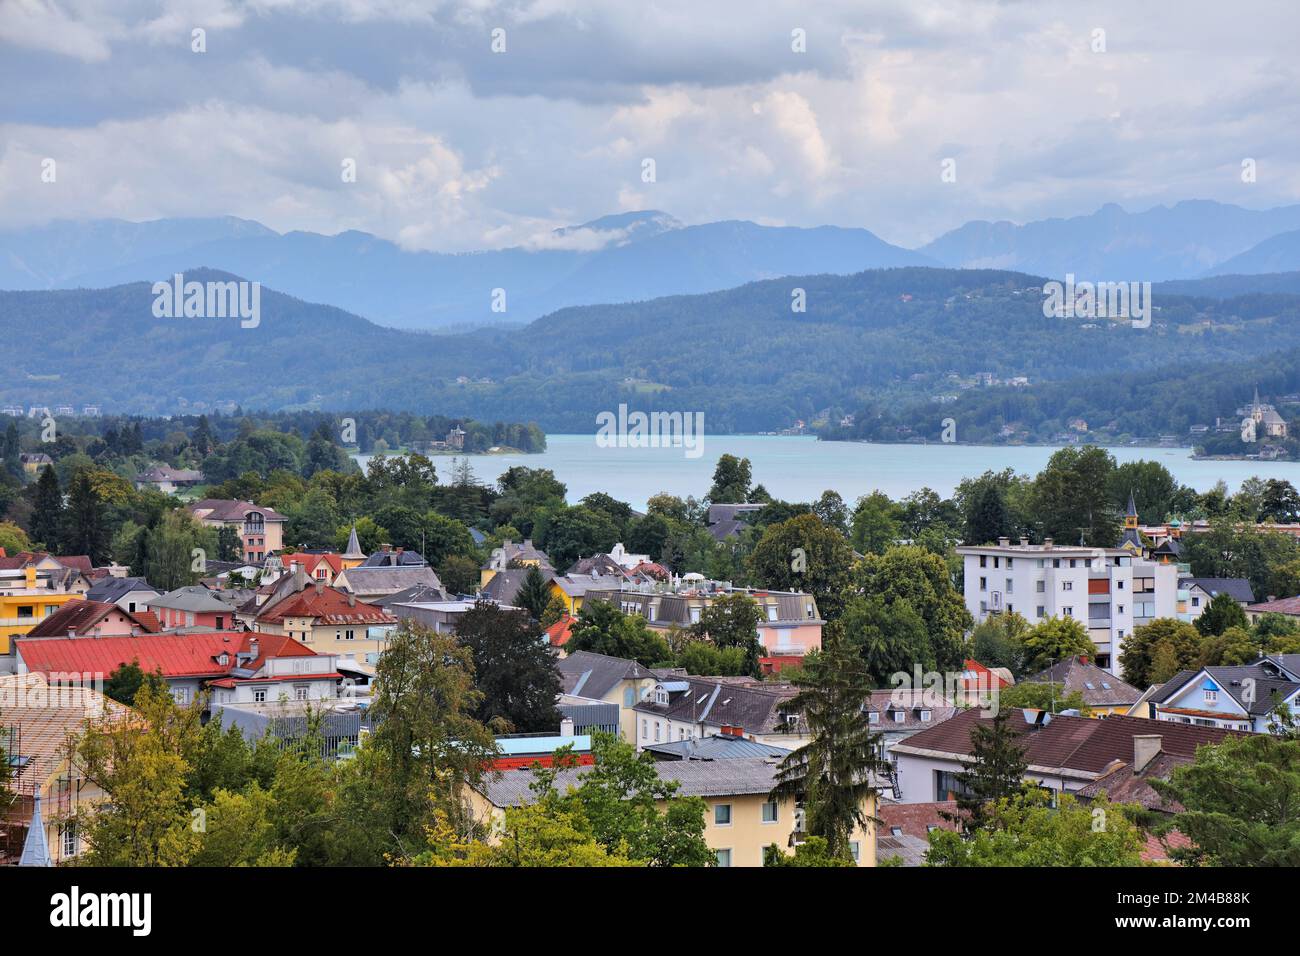 Worthersee mountain lake in Austrian Alps. Austria landscape in State of Carinthia. Town of Portschach am Worther See (Poertschach). Stock Photo